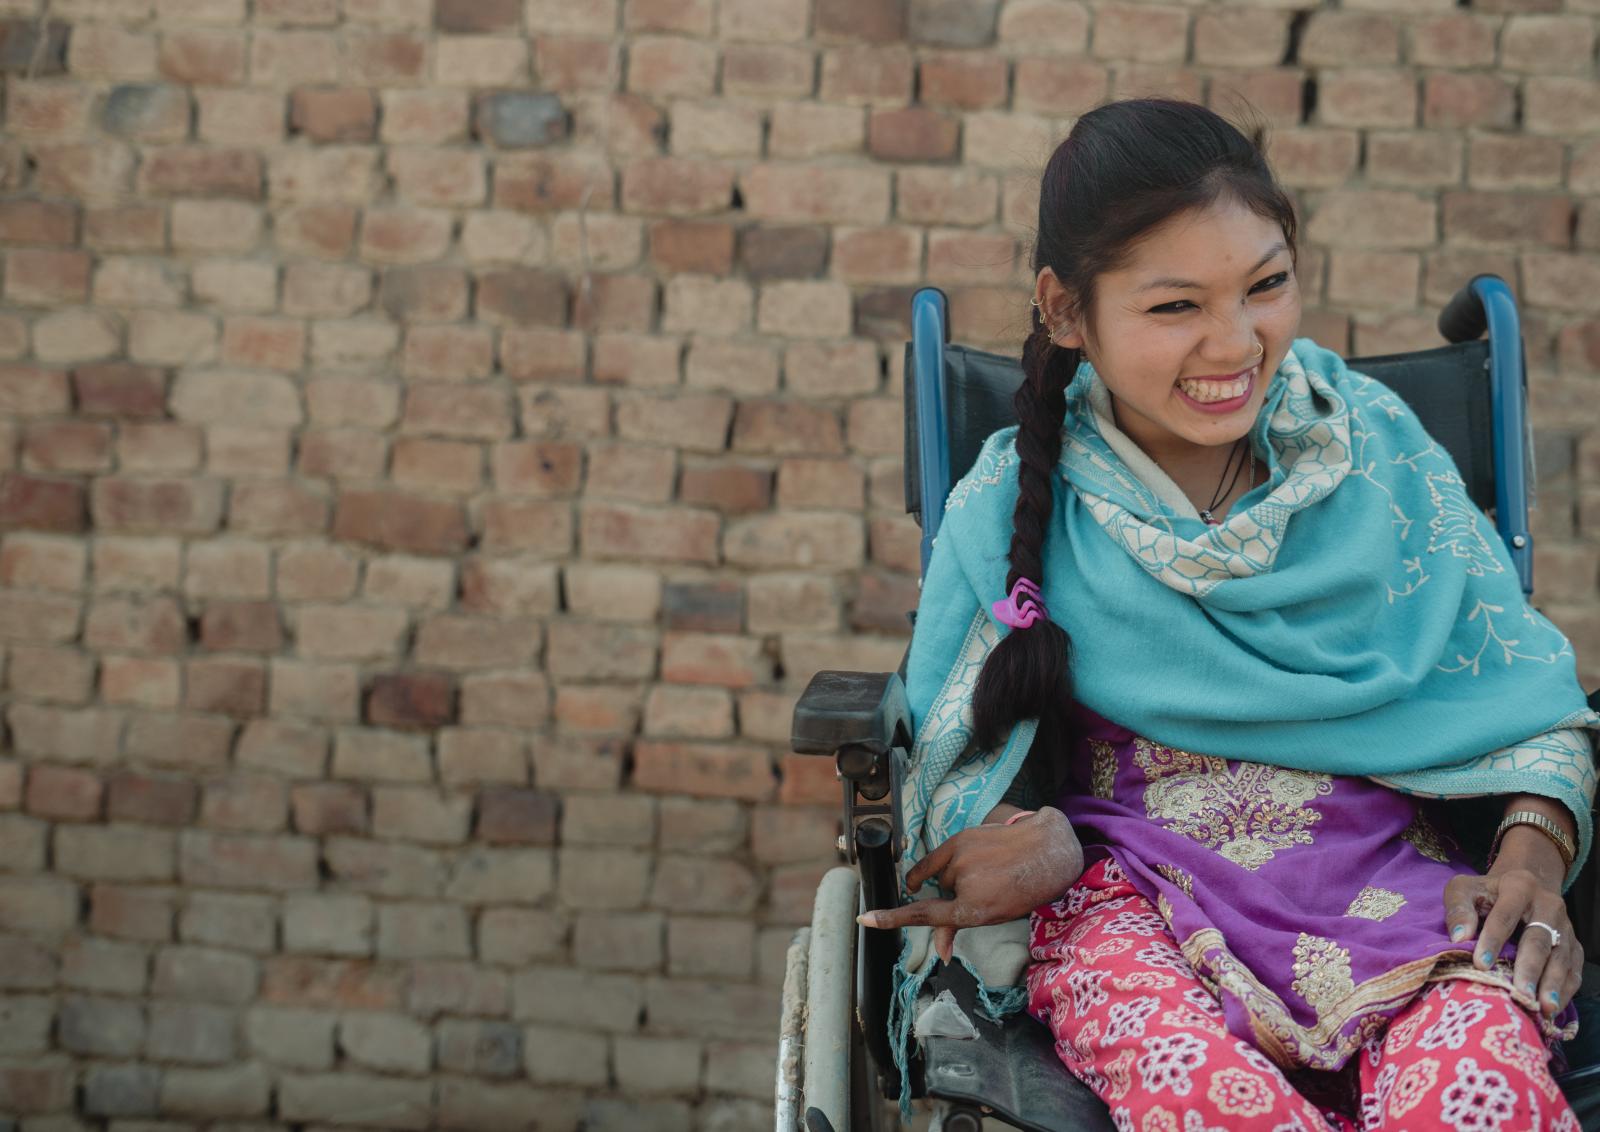 Rabina in her wheelchair given by a VSO volunteer